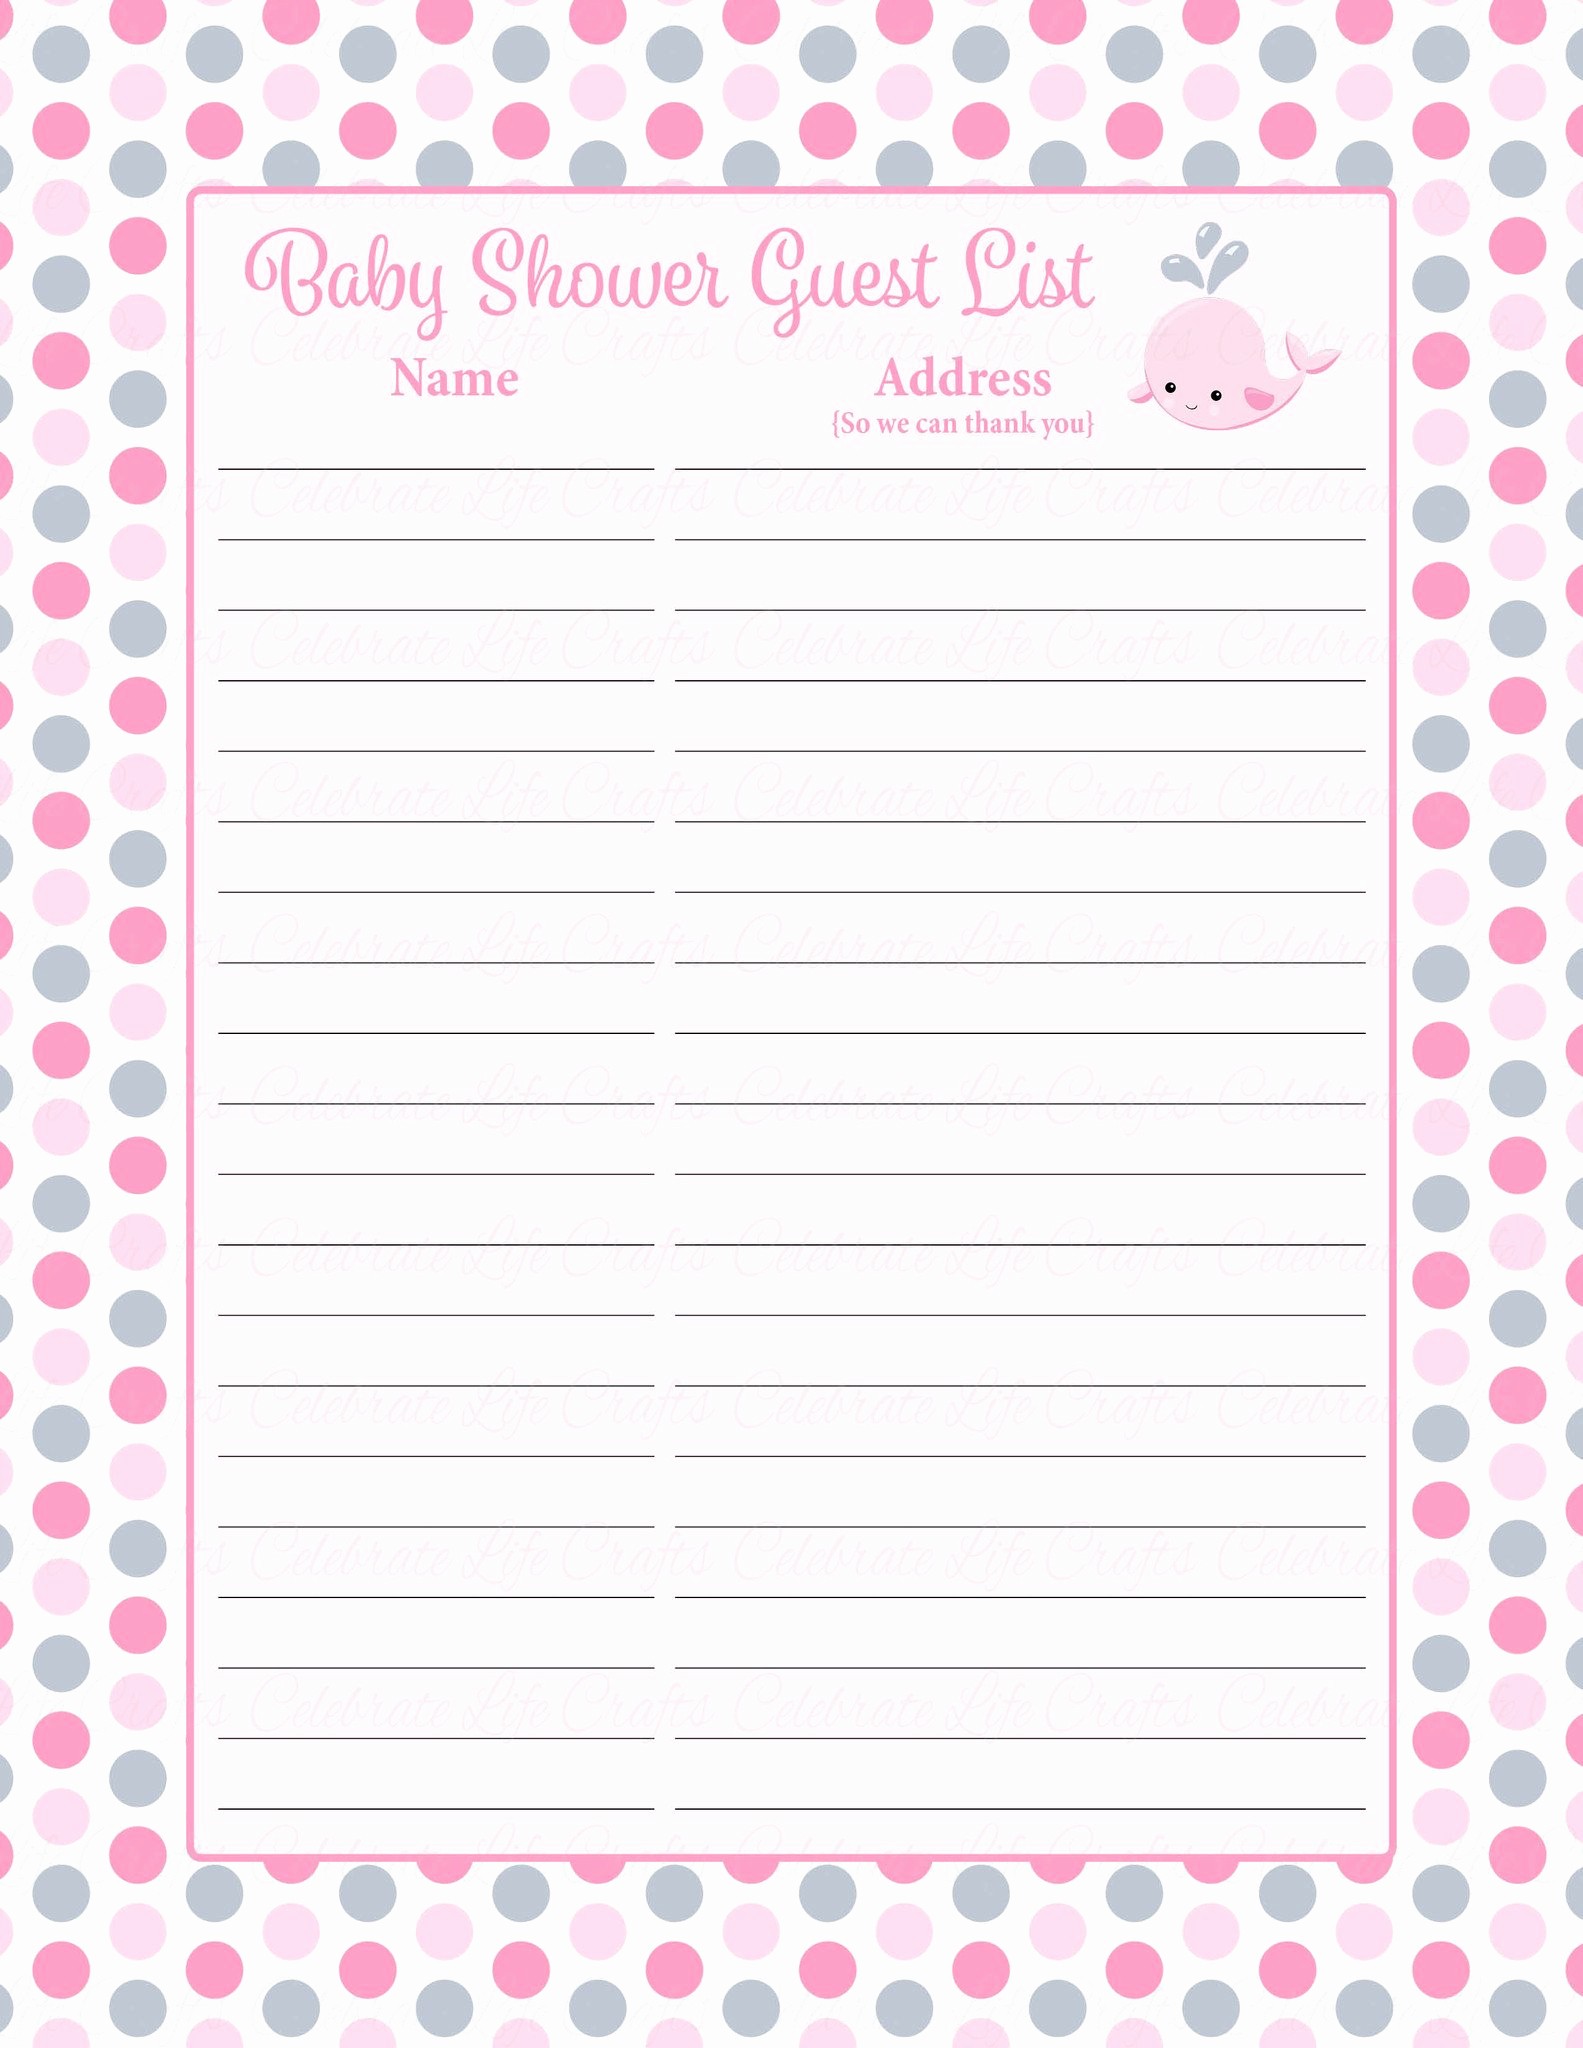 Printable Baby Shower Guest List Lovely Printable Baby Shower Guest List Portablegasgrillweber